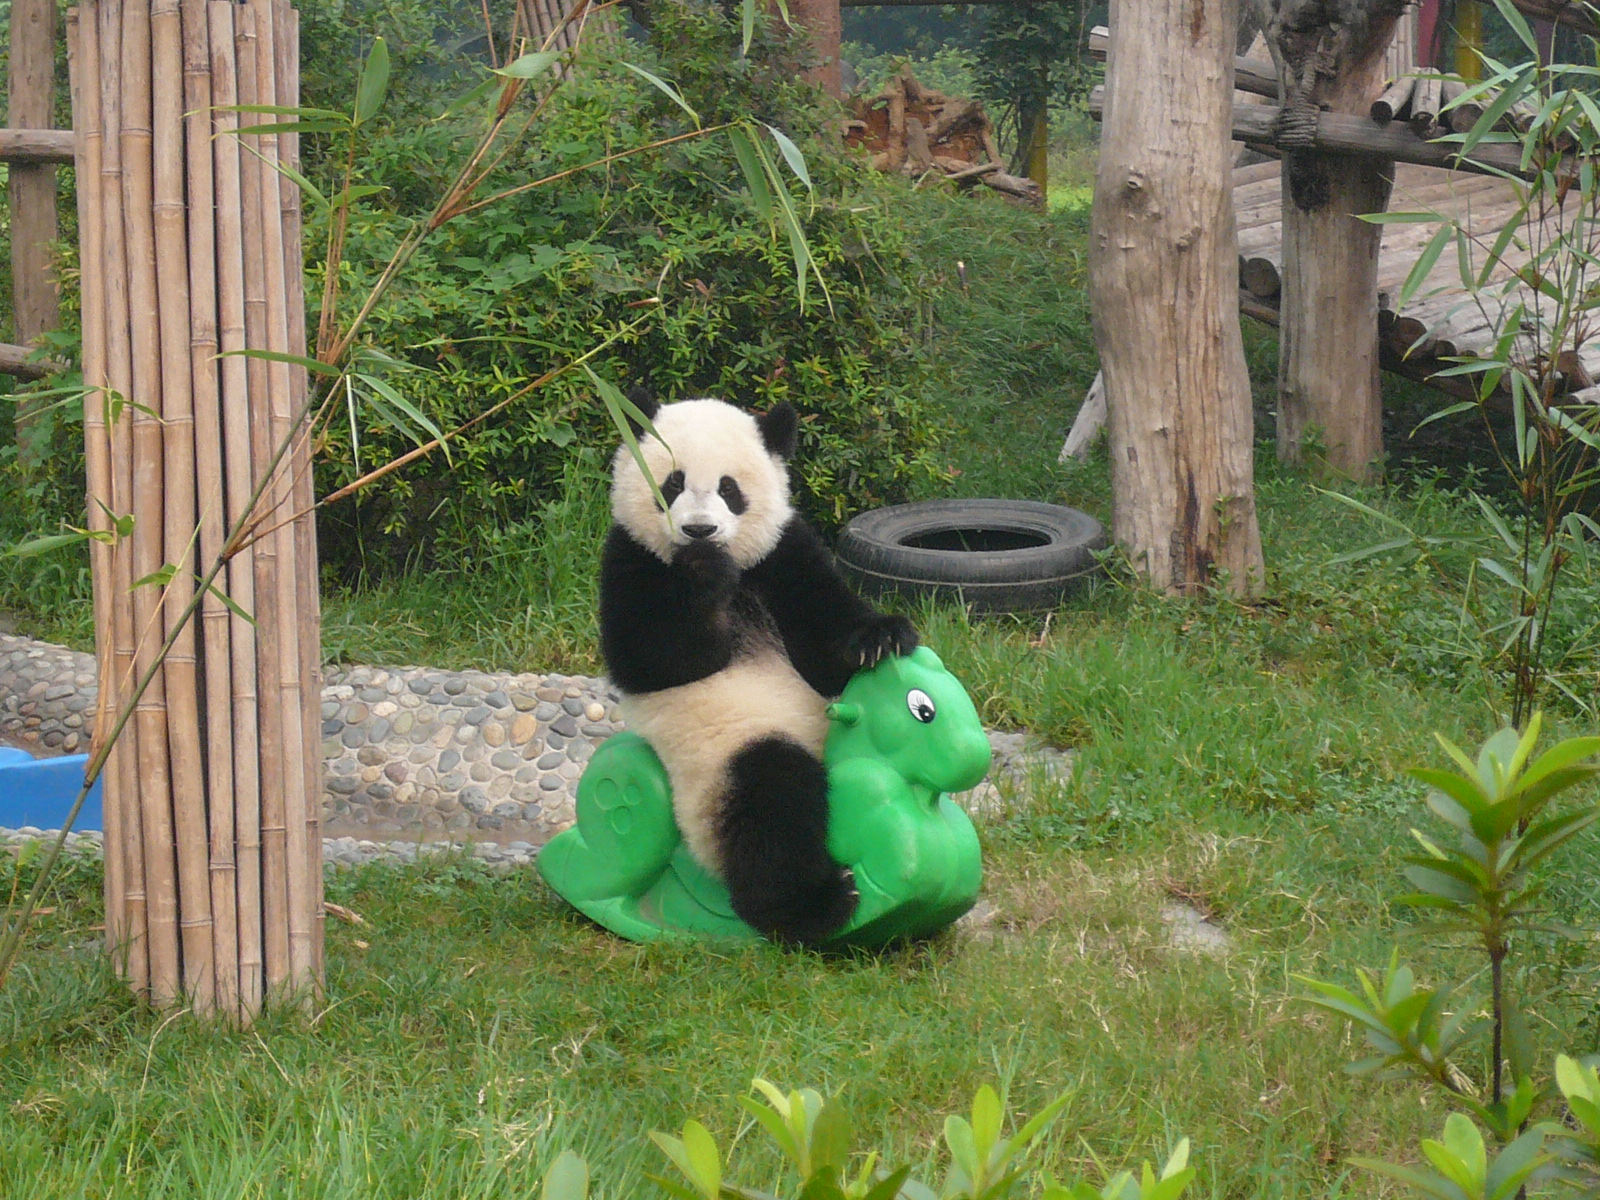 Bamboo and Panda zoos Where to see giant pandas around the world